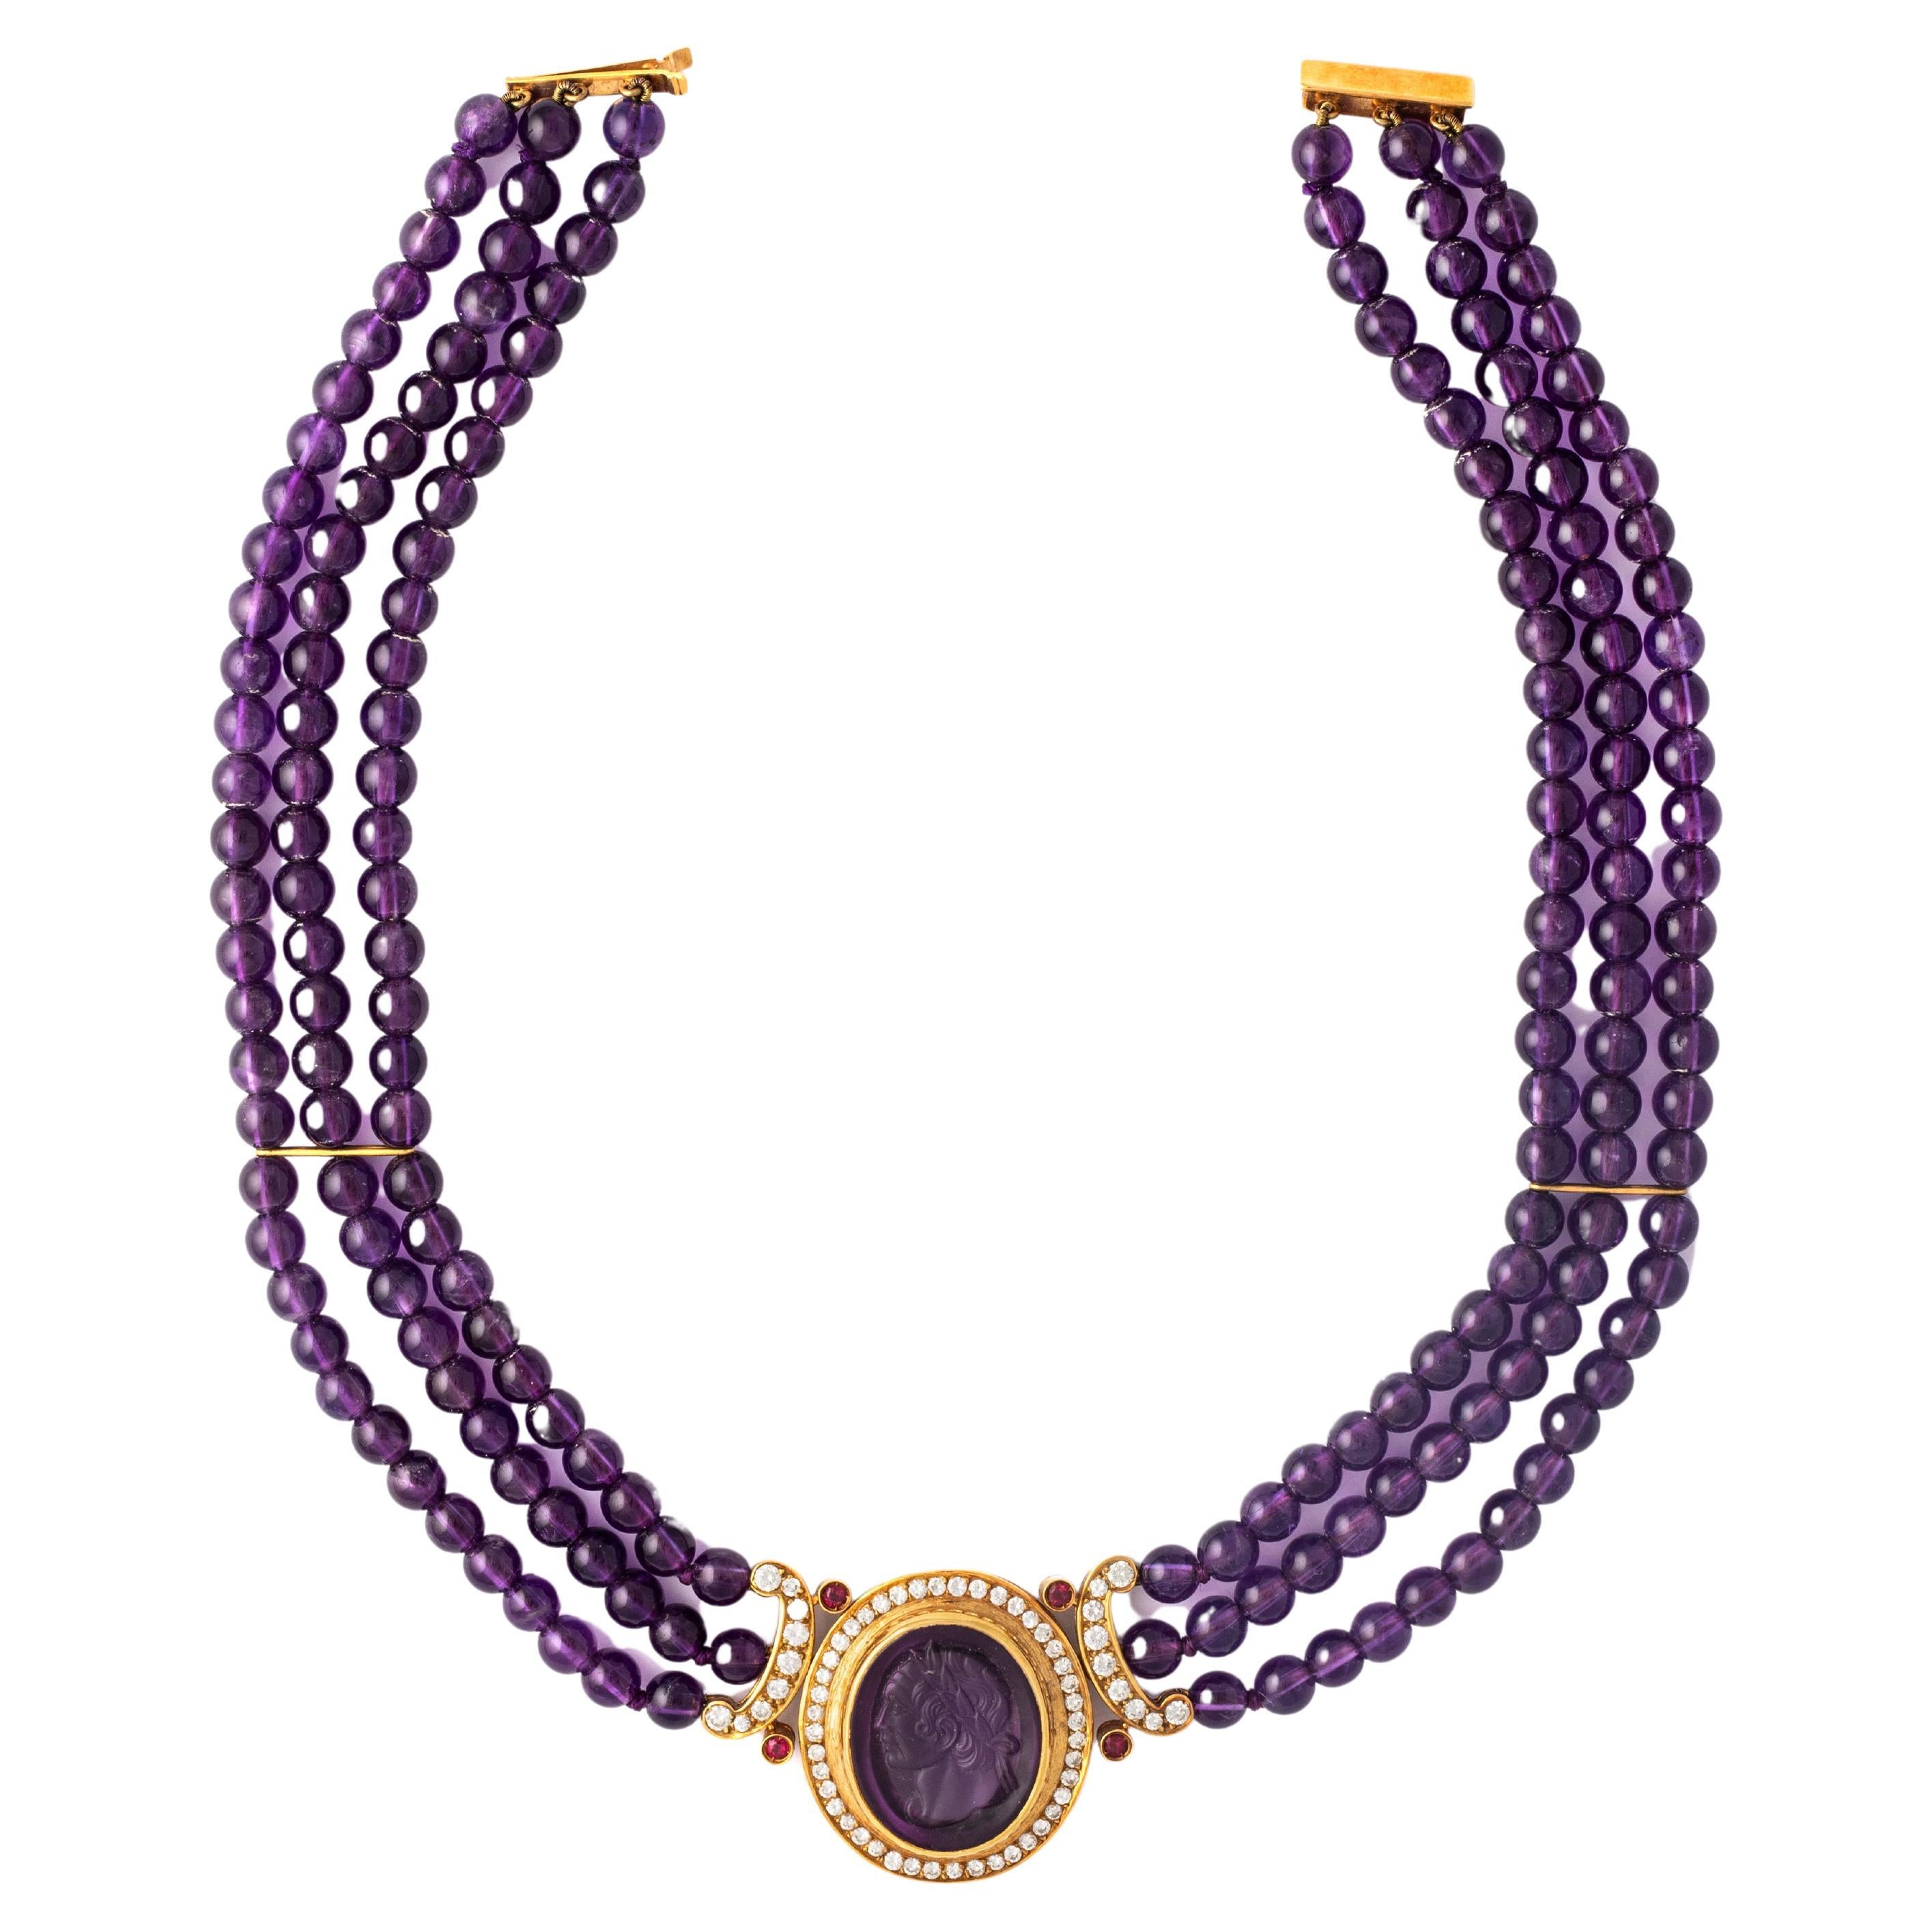 Amethyst beads, diamond and yellow gold necklace holding a central cameo amethyst pendant.

Total length: approx. 37.5 centimeters.

Pendant width: 4.00 centimeters.
Pendant Height: approx. 3.10 centimeters.

Total weight: 82.68 grams.
